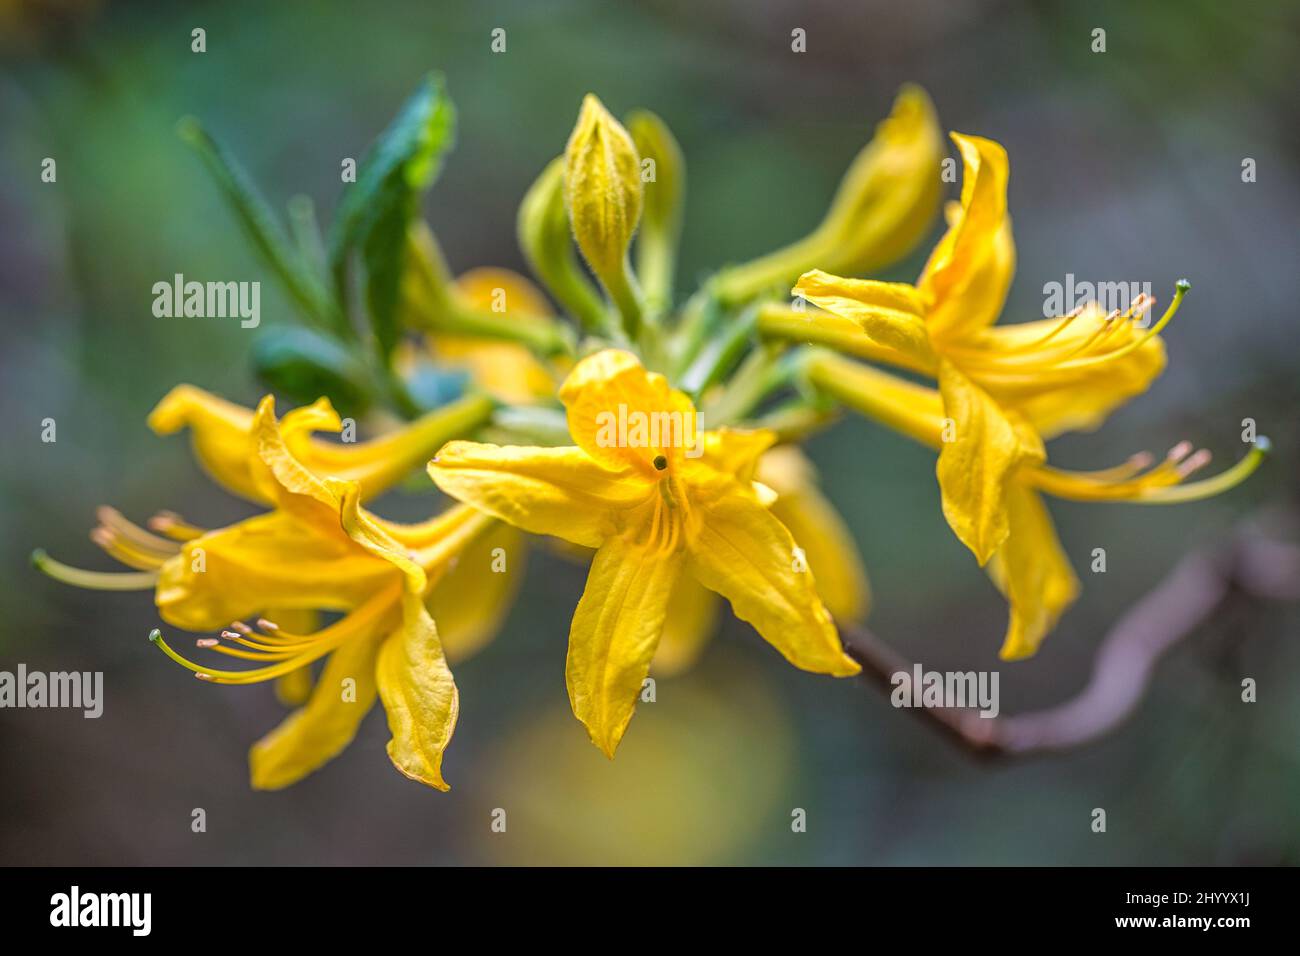 Azaleas yellow flowers in close-up view on a blurred background. Stock Photo